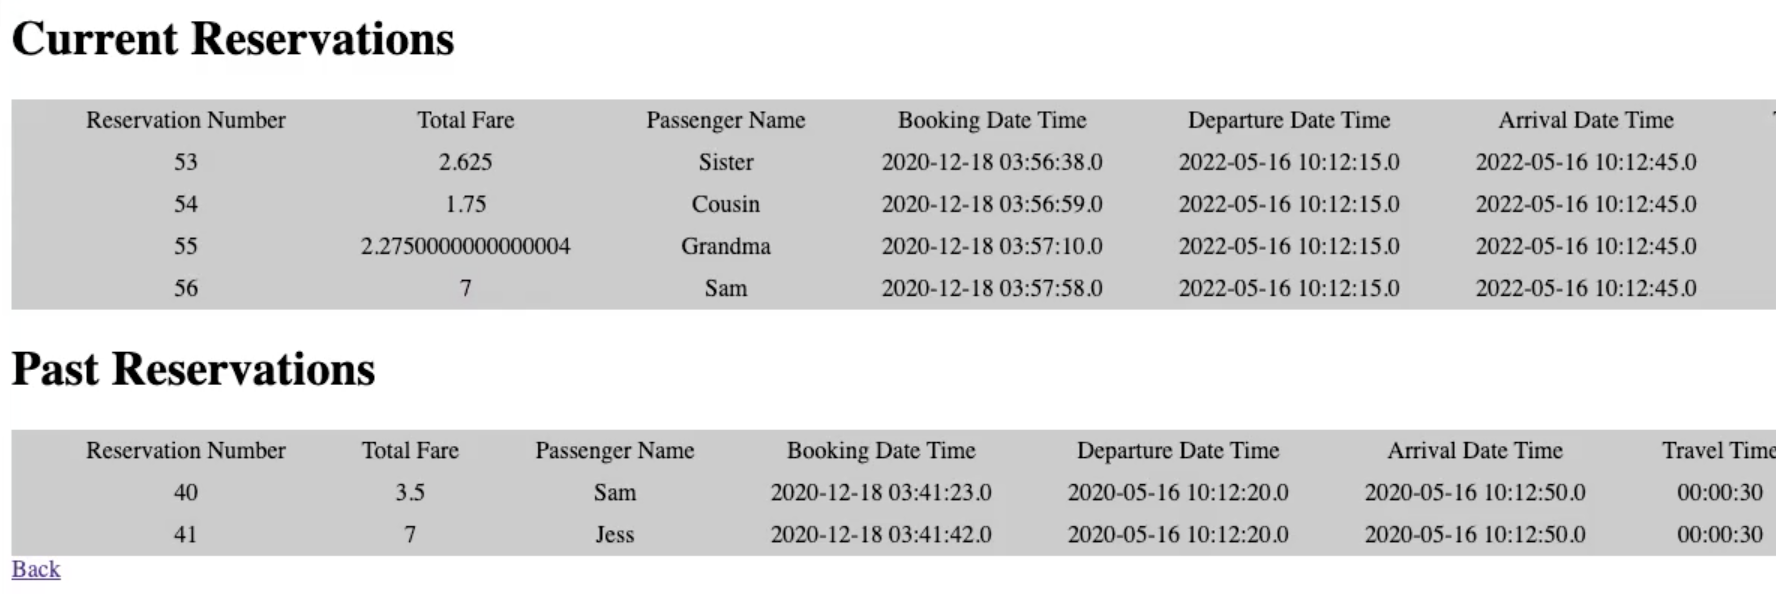 Two simple HTML tables displaying information about current and past train reservations. Both have the same columns: reservation number, total fare, passenger name, booking date time, departure date time, arrival date time, and travel time (cut off for current reservations).